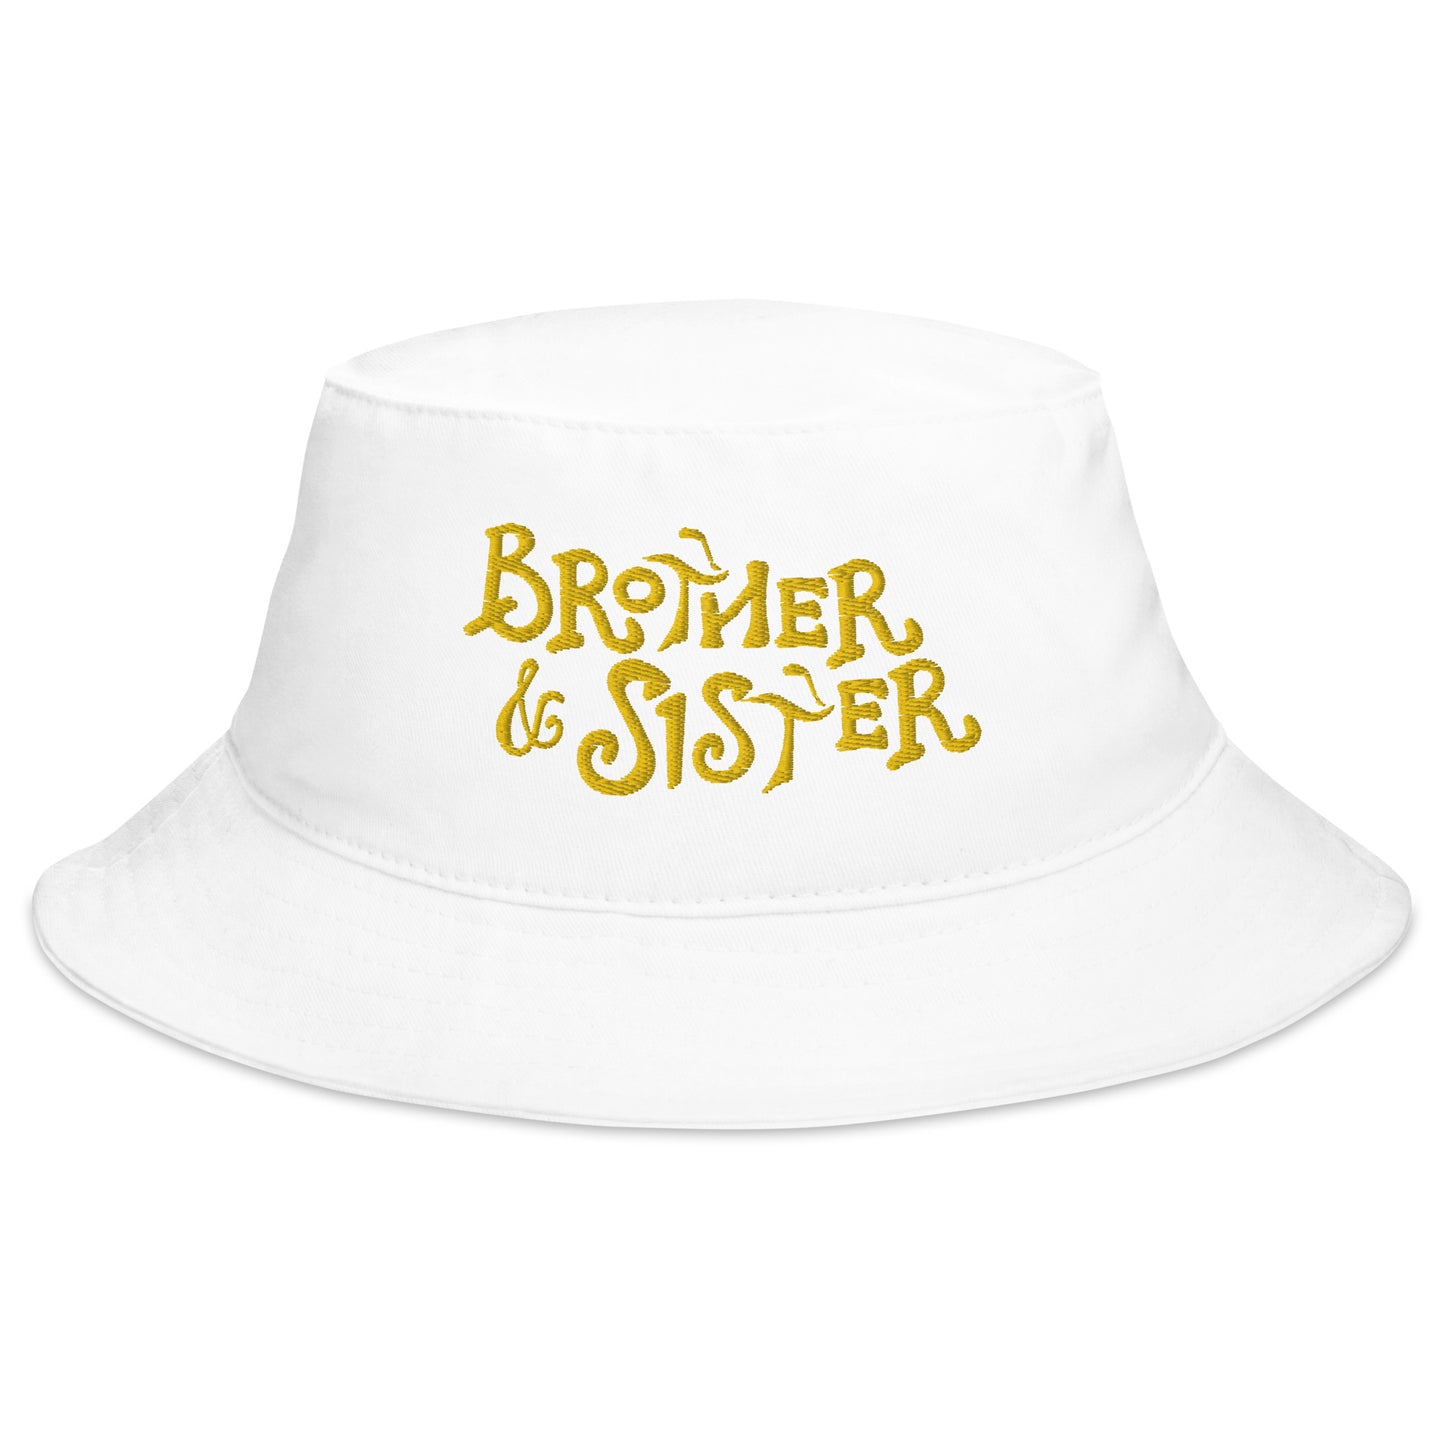 Brother and Sister Bucket Hat